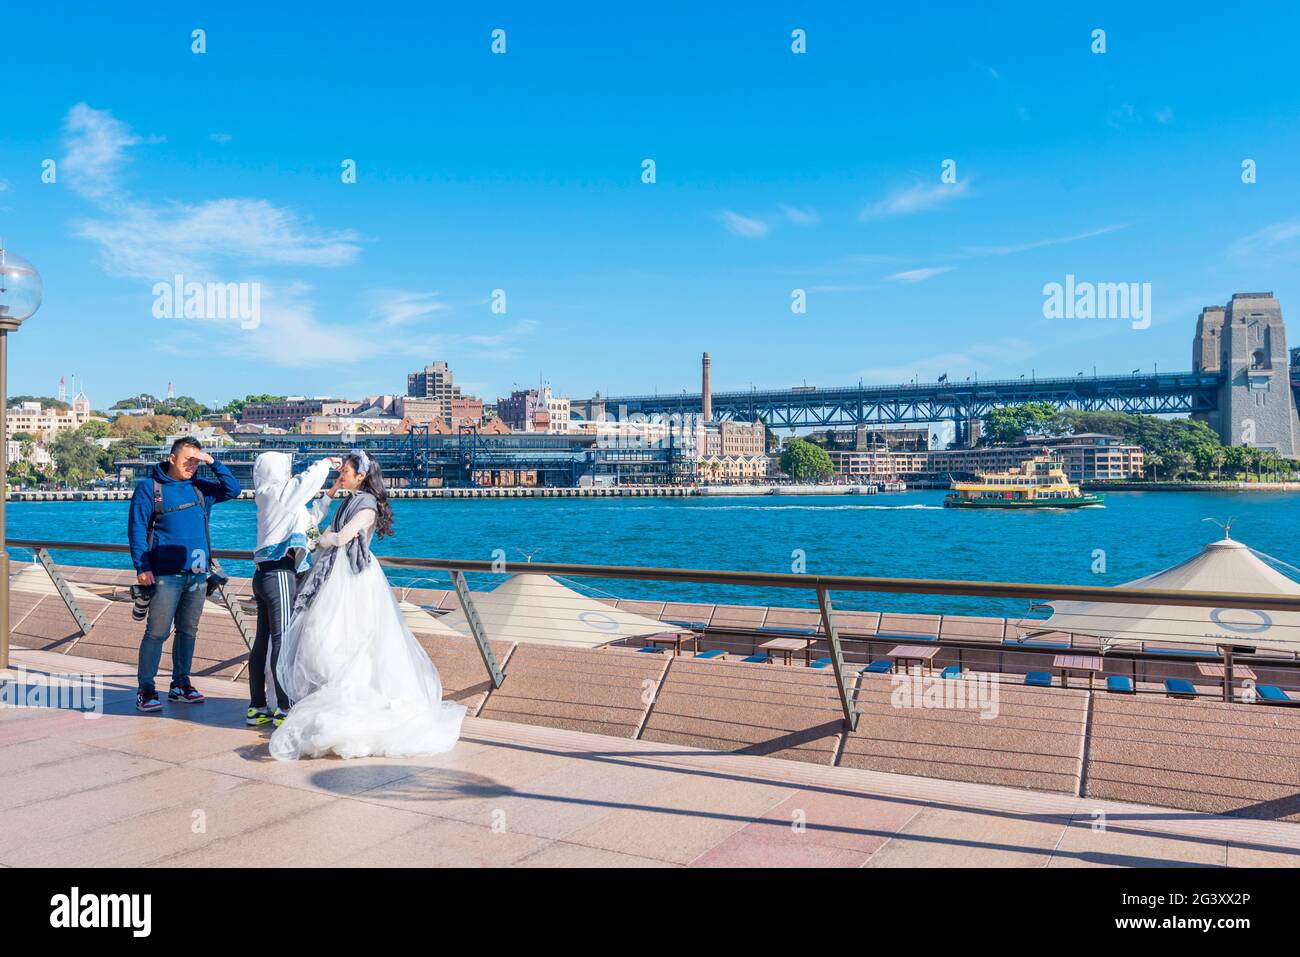 A bride at the Sydney Opera House and Sydney Harbour in Australia gets her makeup adjusted while a photographer patiently waits Stock Photo